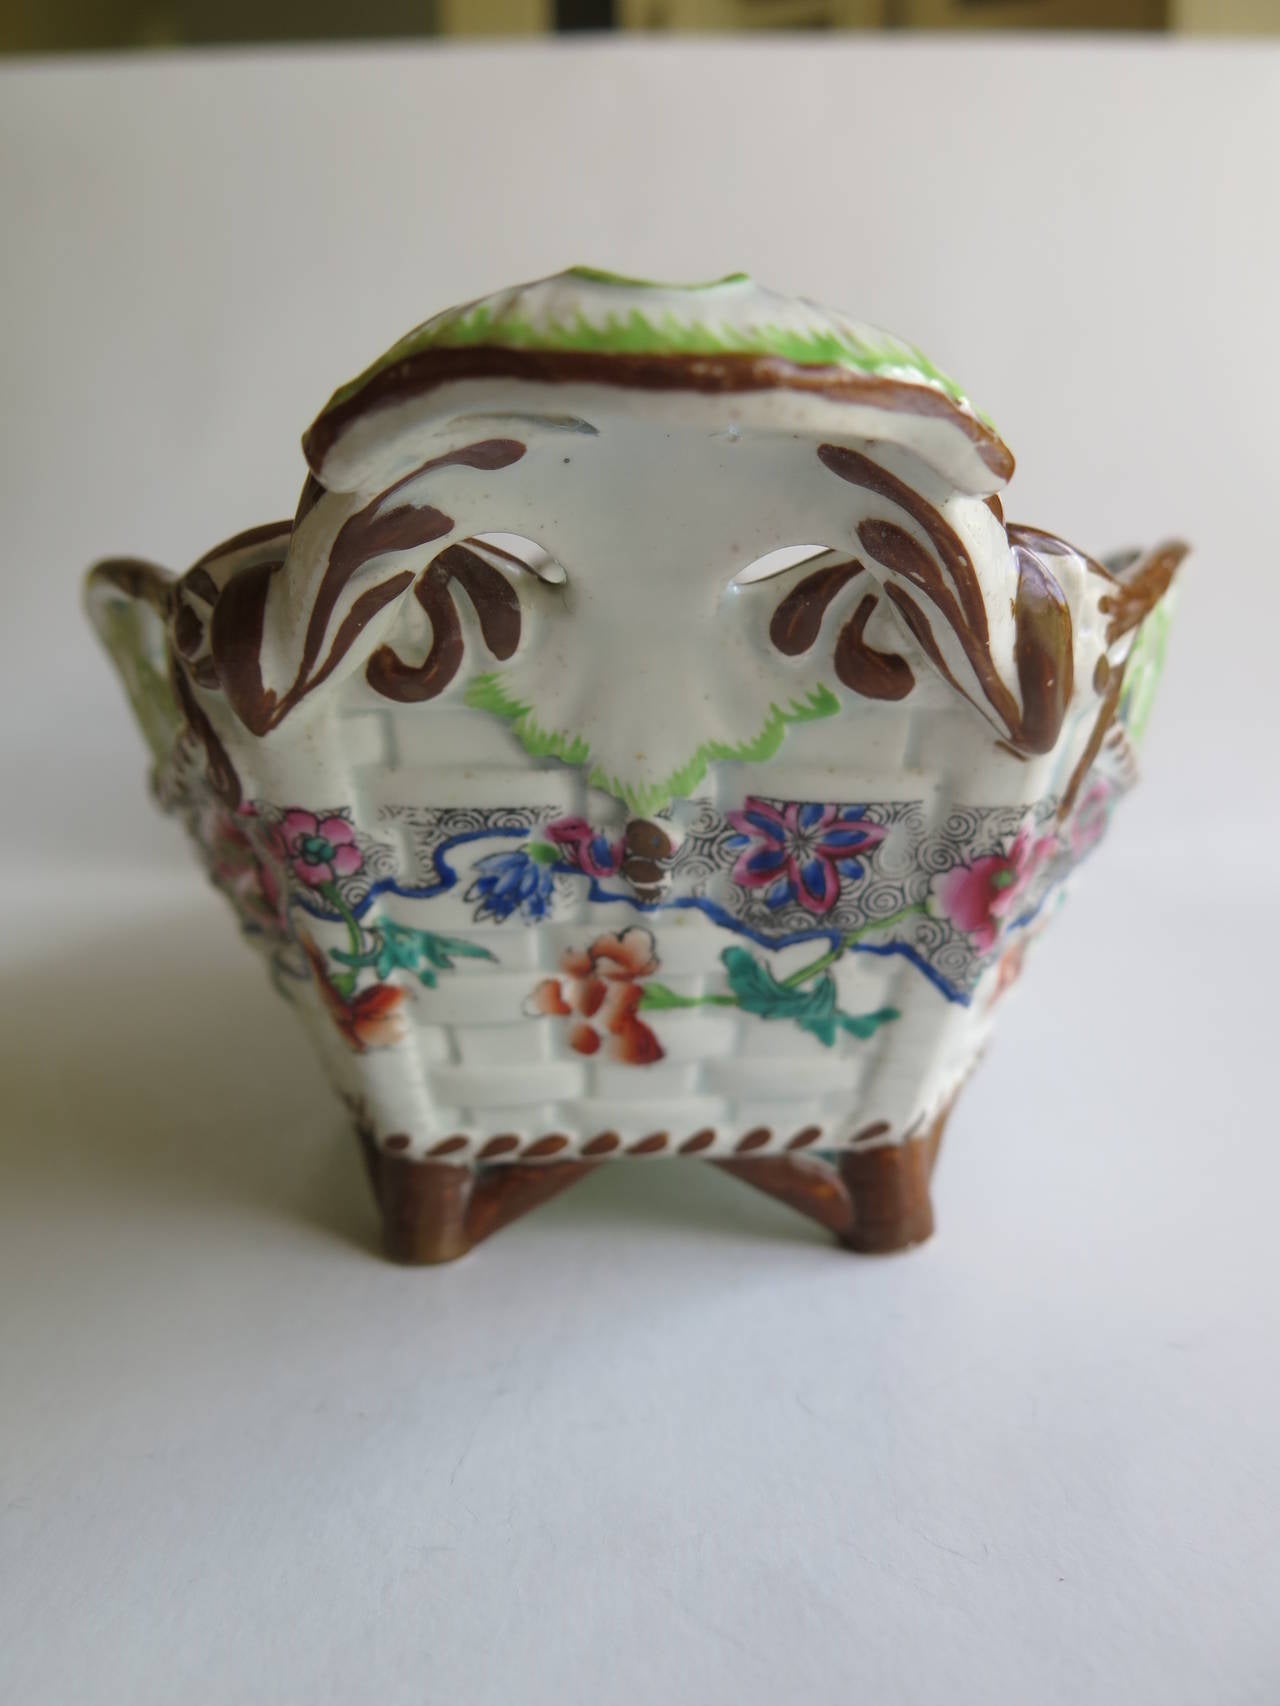 Early Spode Creamware Pierced Chestnut Basket  English circa 1825 In Good Condition For Sale In Lincoln, Lincolnshire